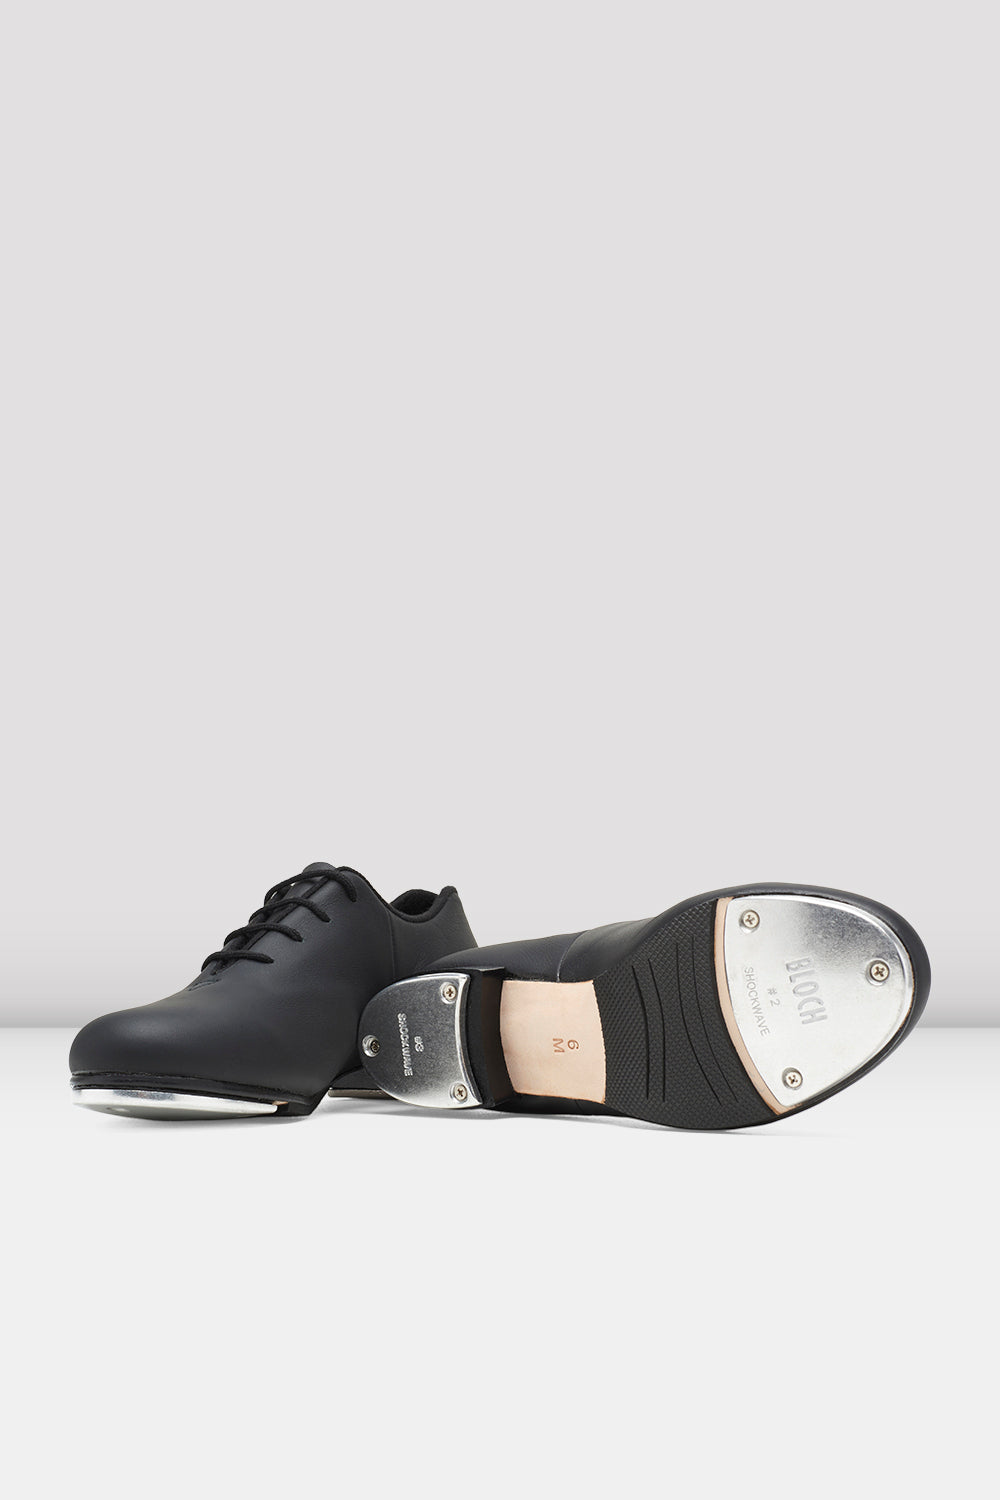 bloch jazz tap shoes